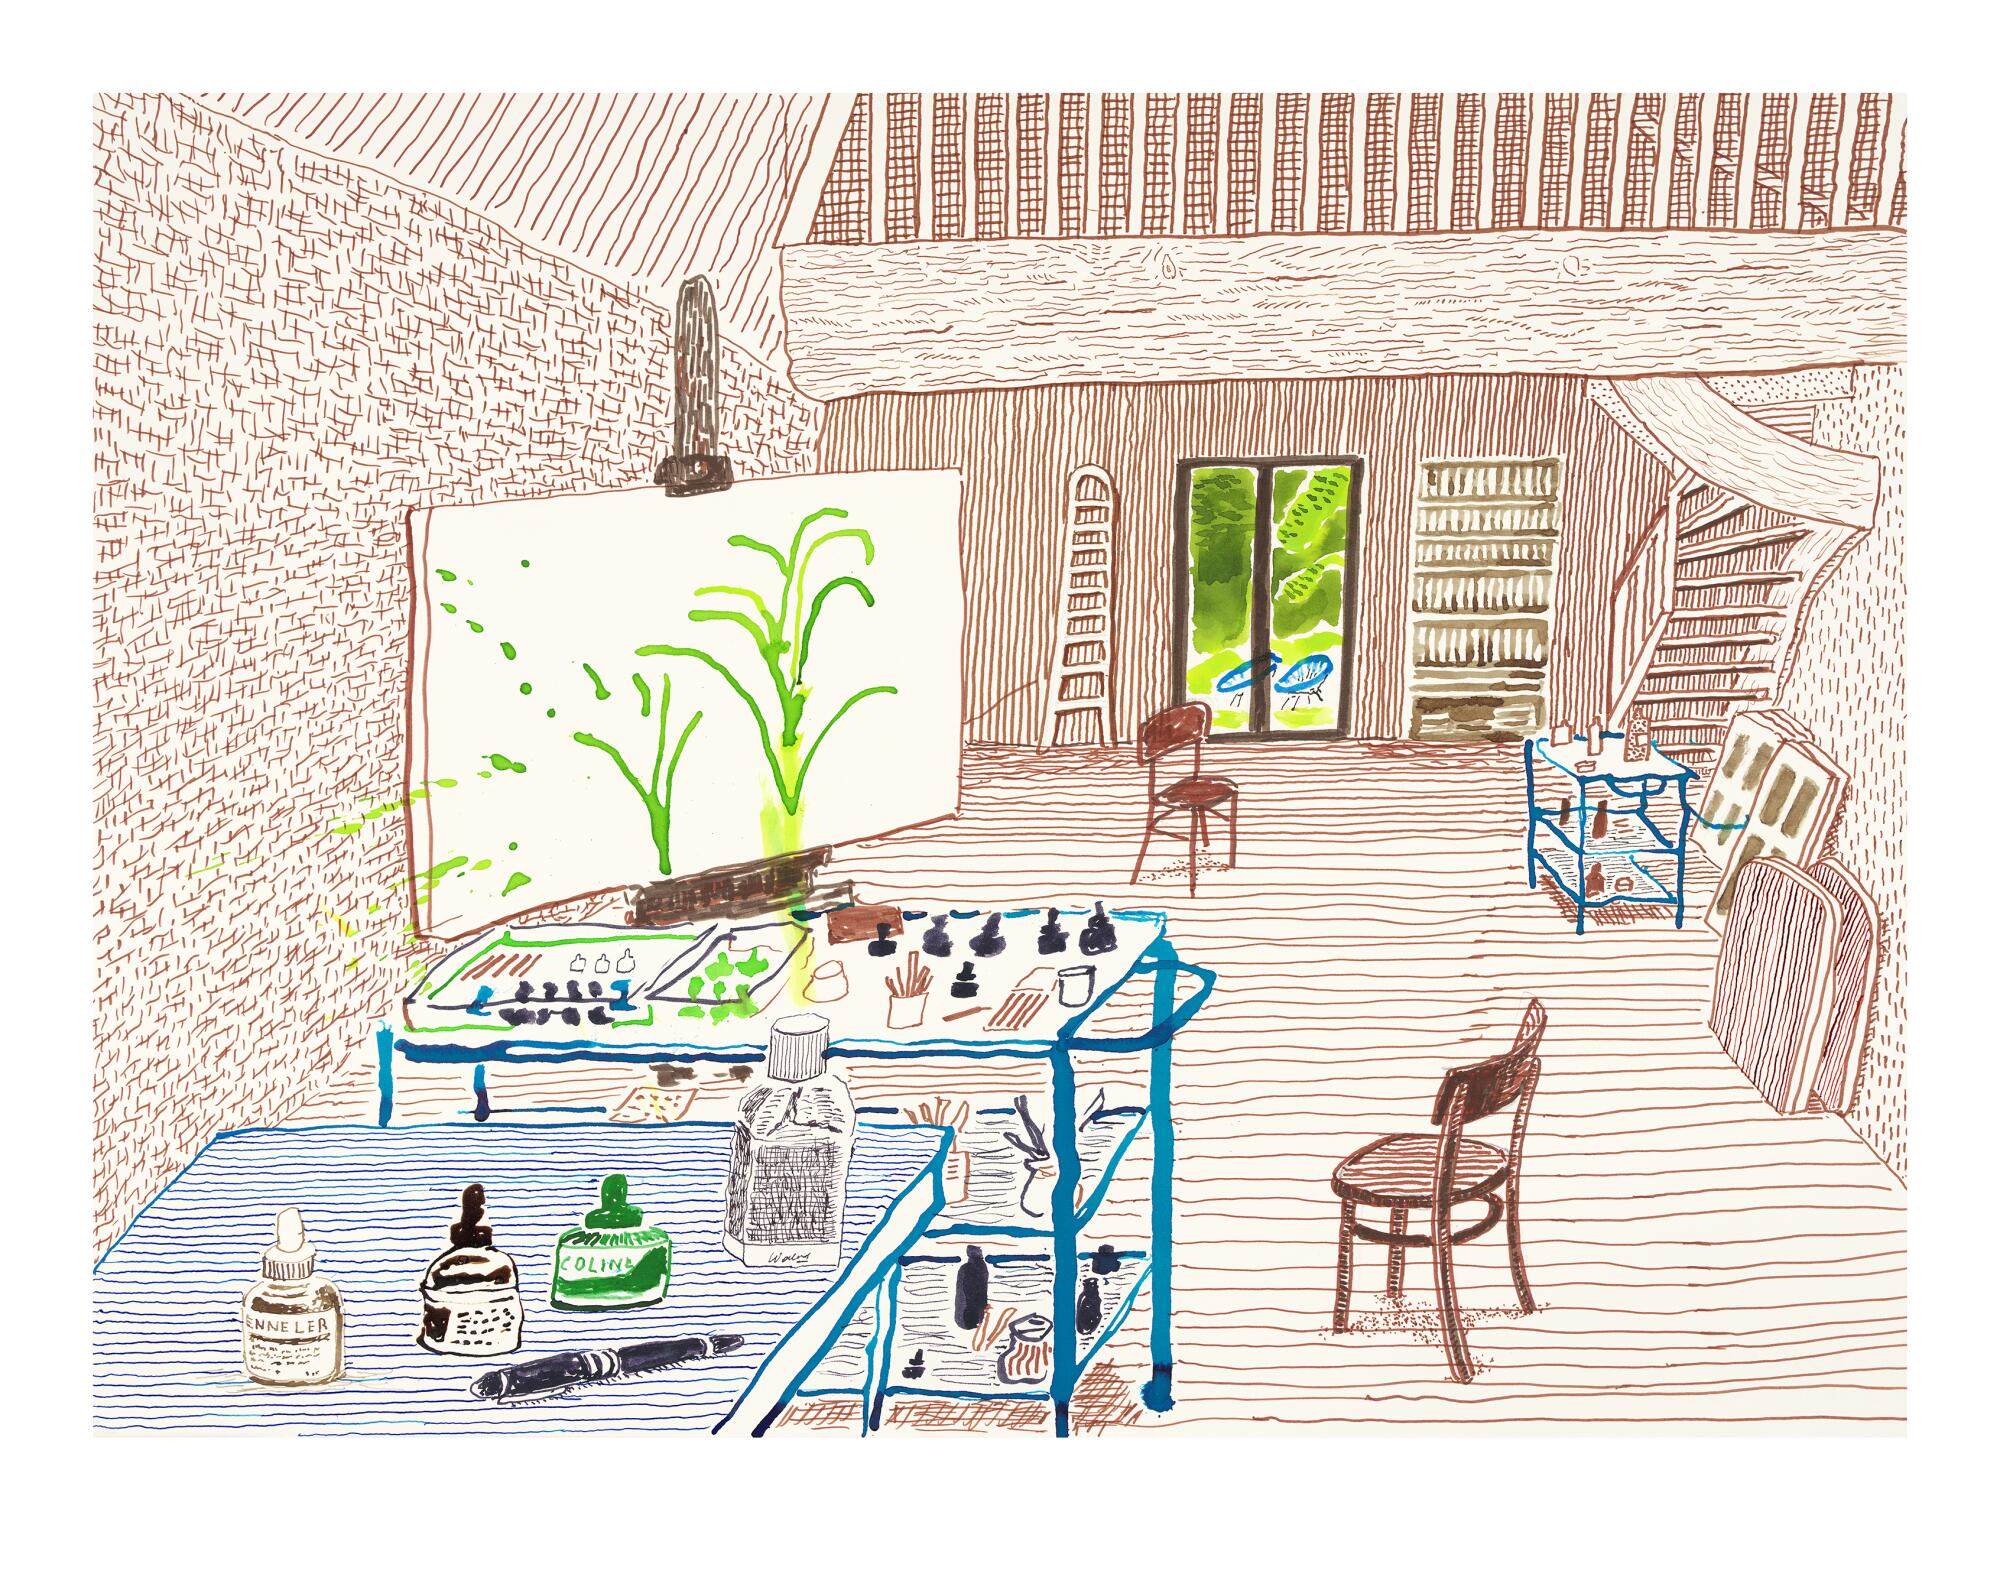 A Hockney work shows an art studio with chairs, supplies on a cart and table, and glass doors to the outside.